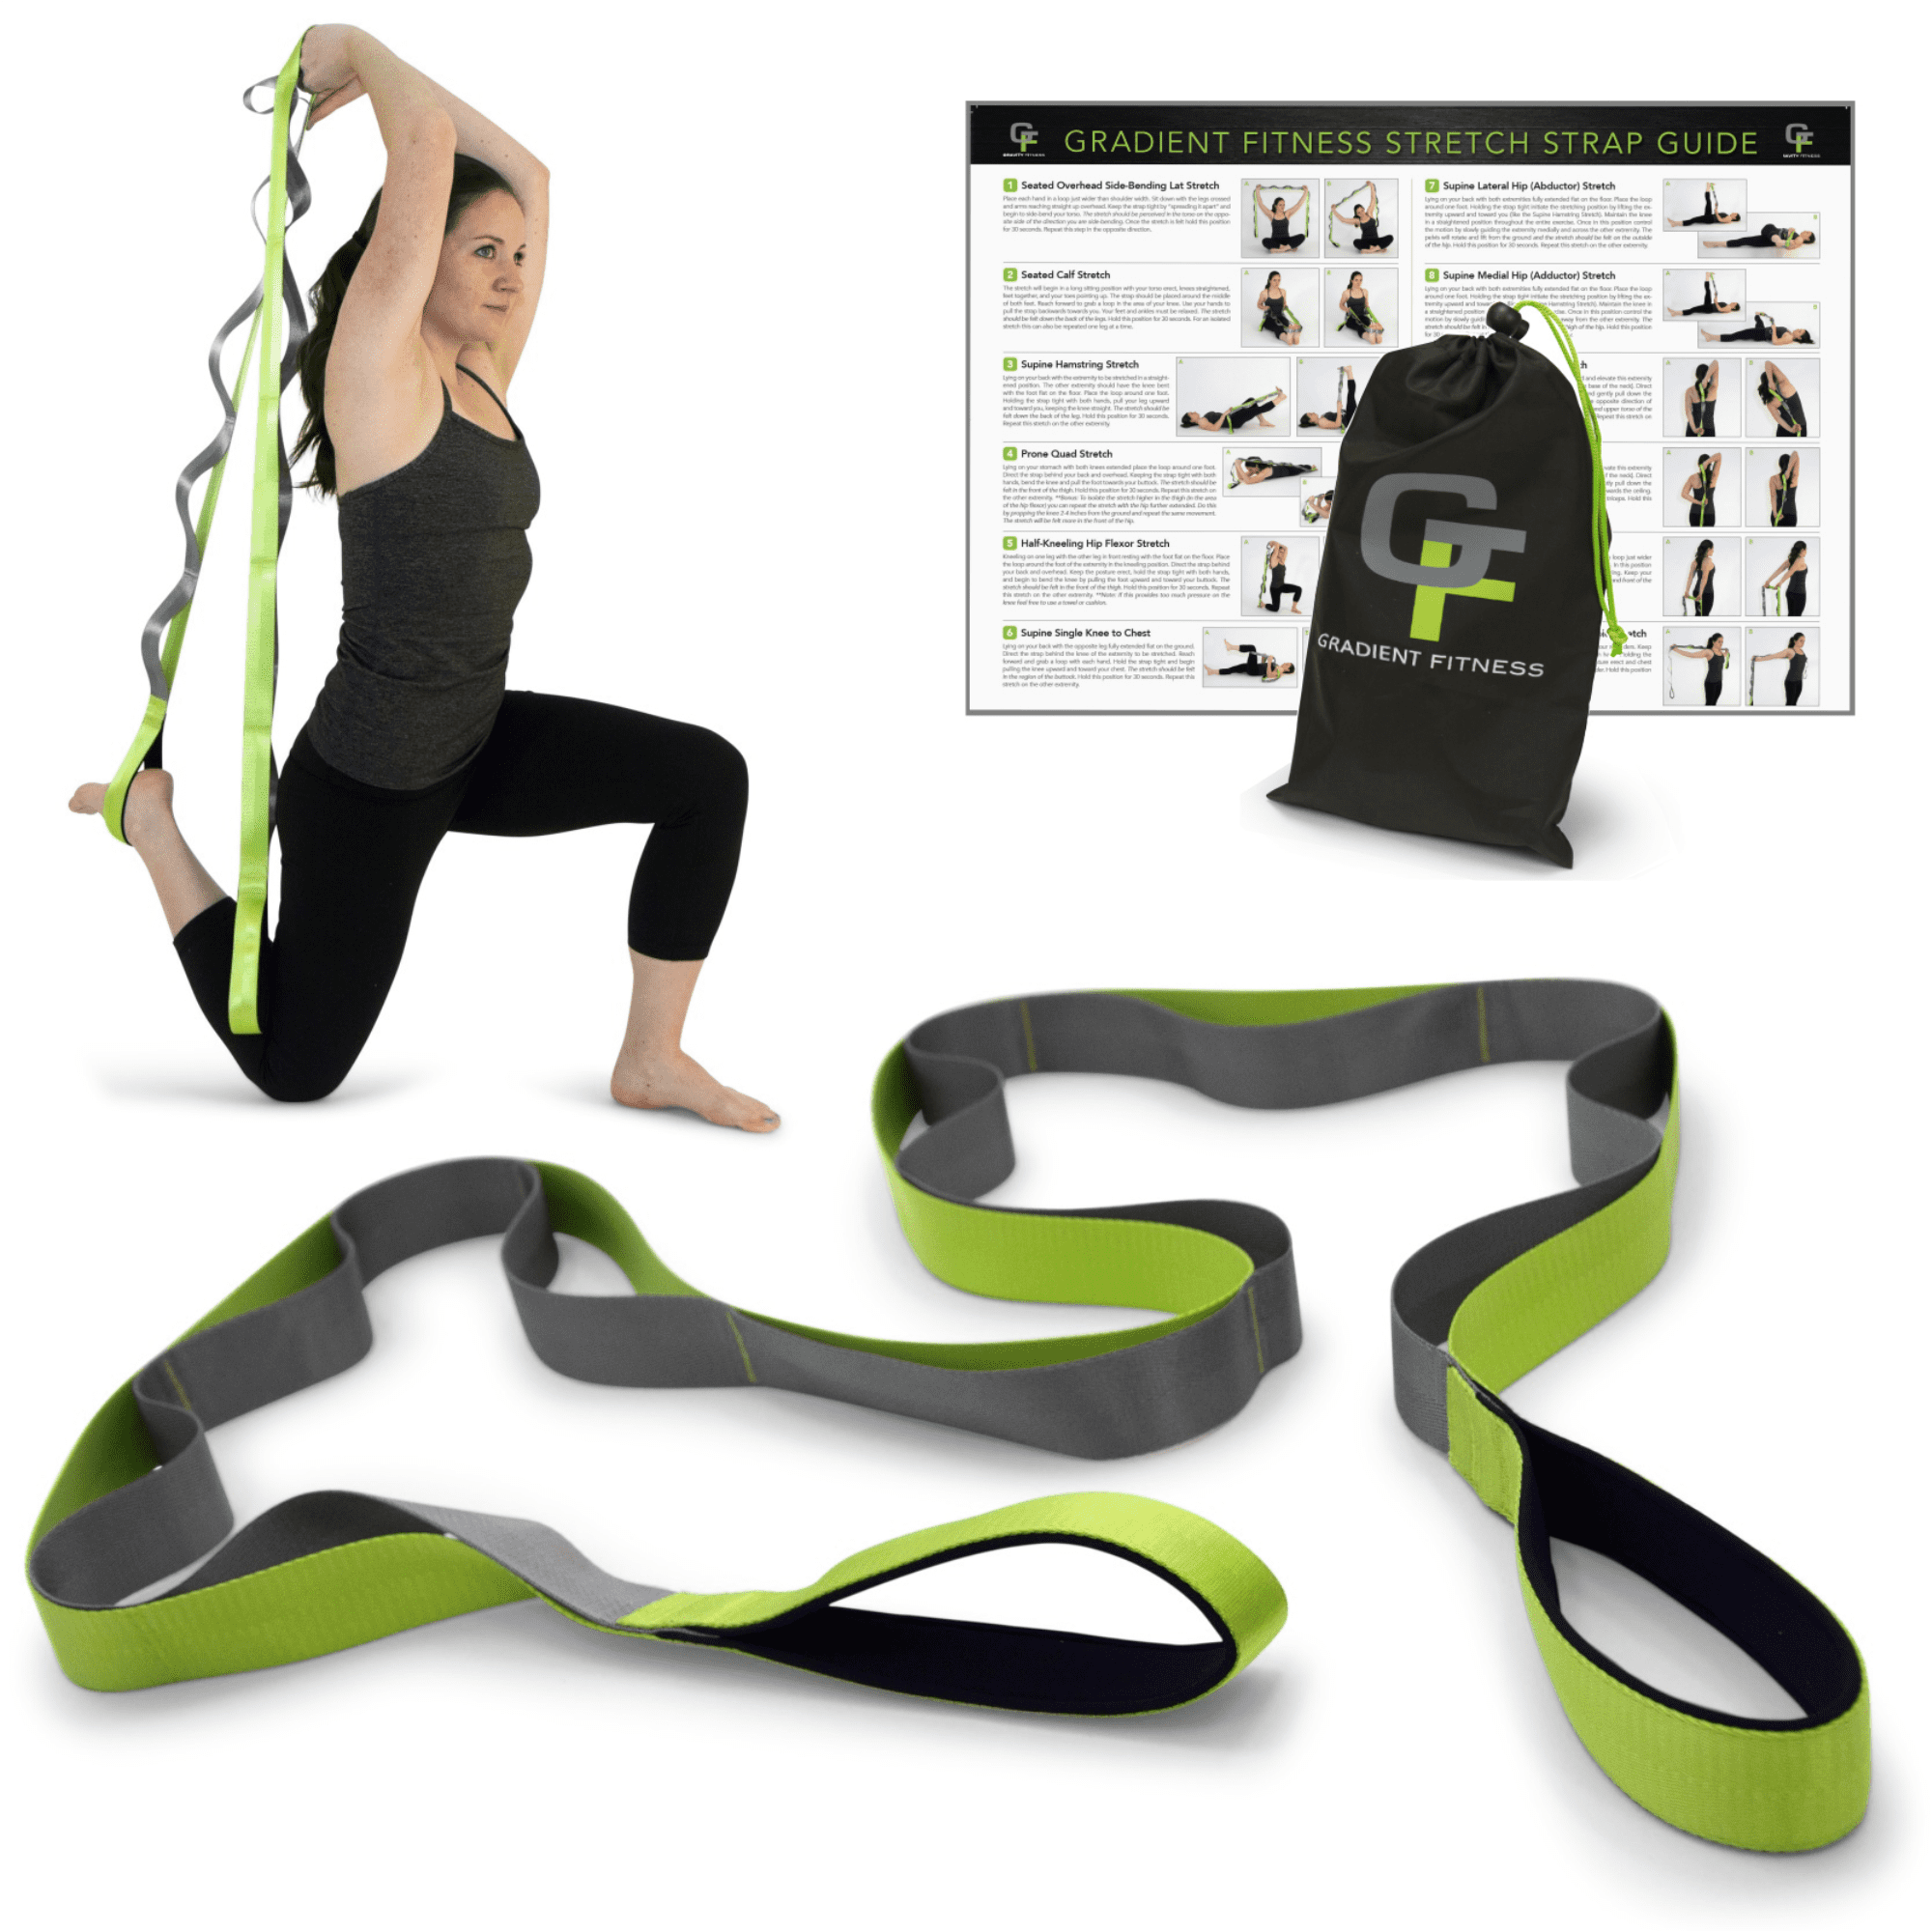 Gradient Fitness Stretching Strap for Physical Therapy, 12 Multi-Loop  Stretch Strap 1.5 W x 8' L, Neoprene Handles, Physical Therapy Equipment,  Yoga Straps for Stretching, Leg Stretcher 